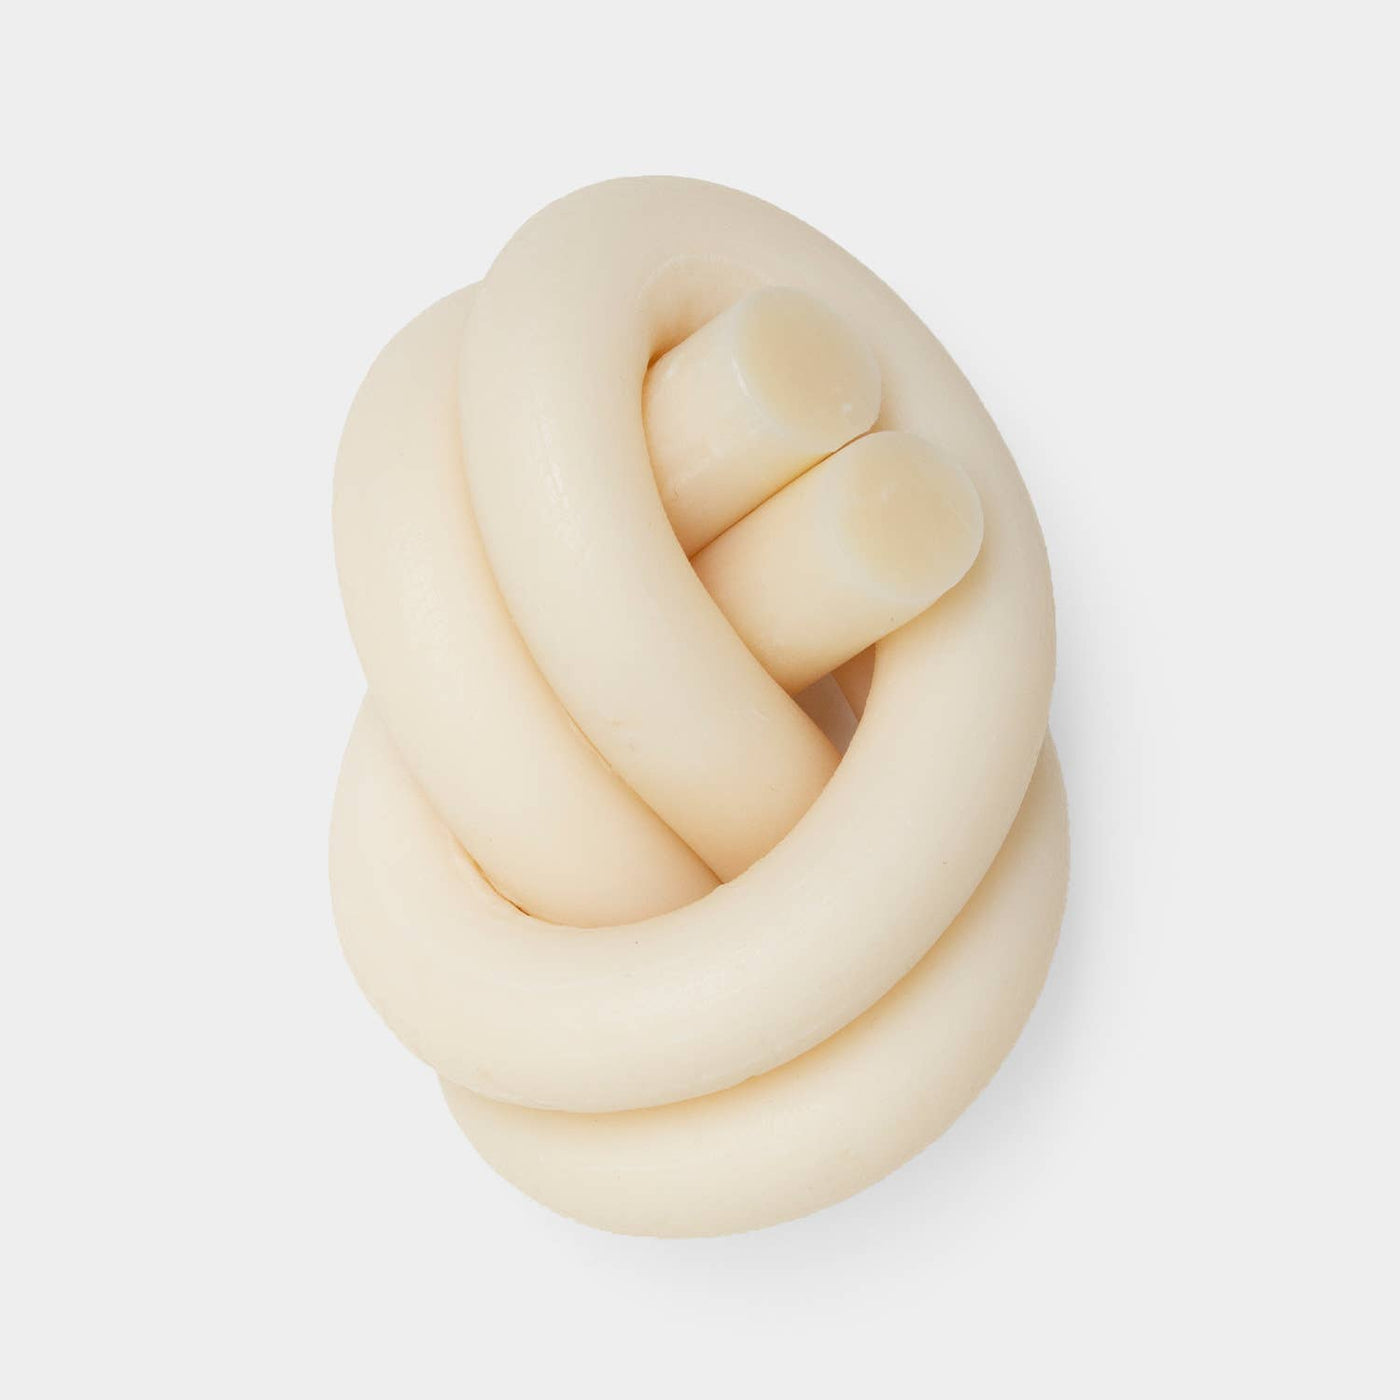 Soft White NOEUD Soap by Lex Pott - The Grey Pearl